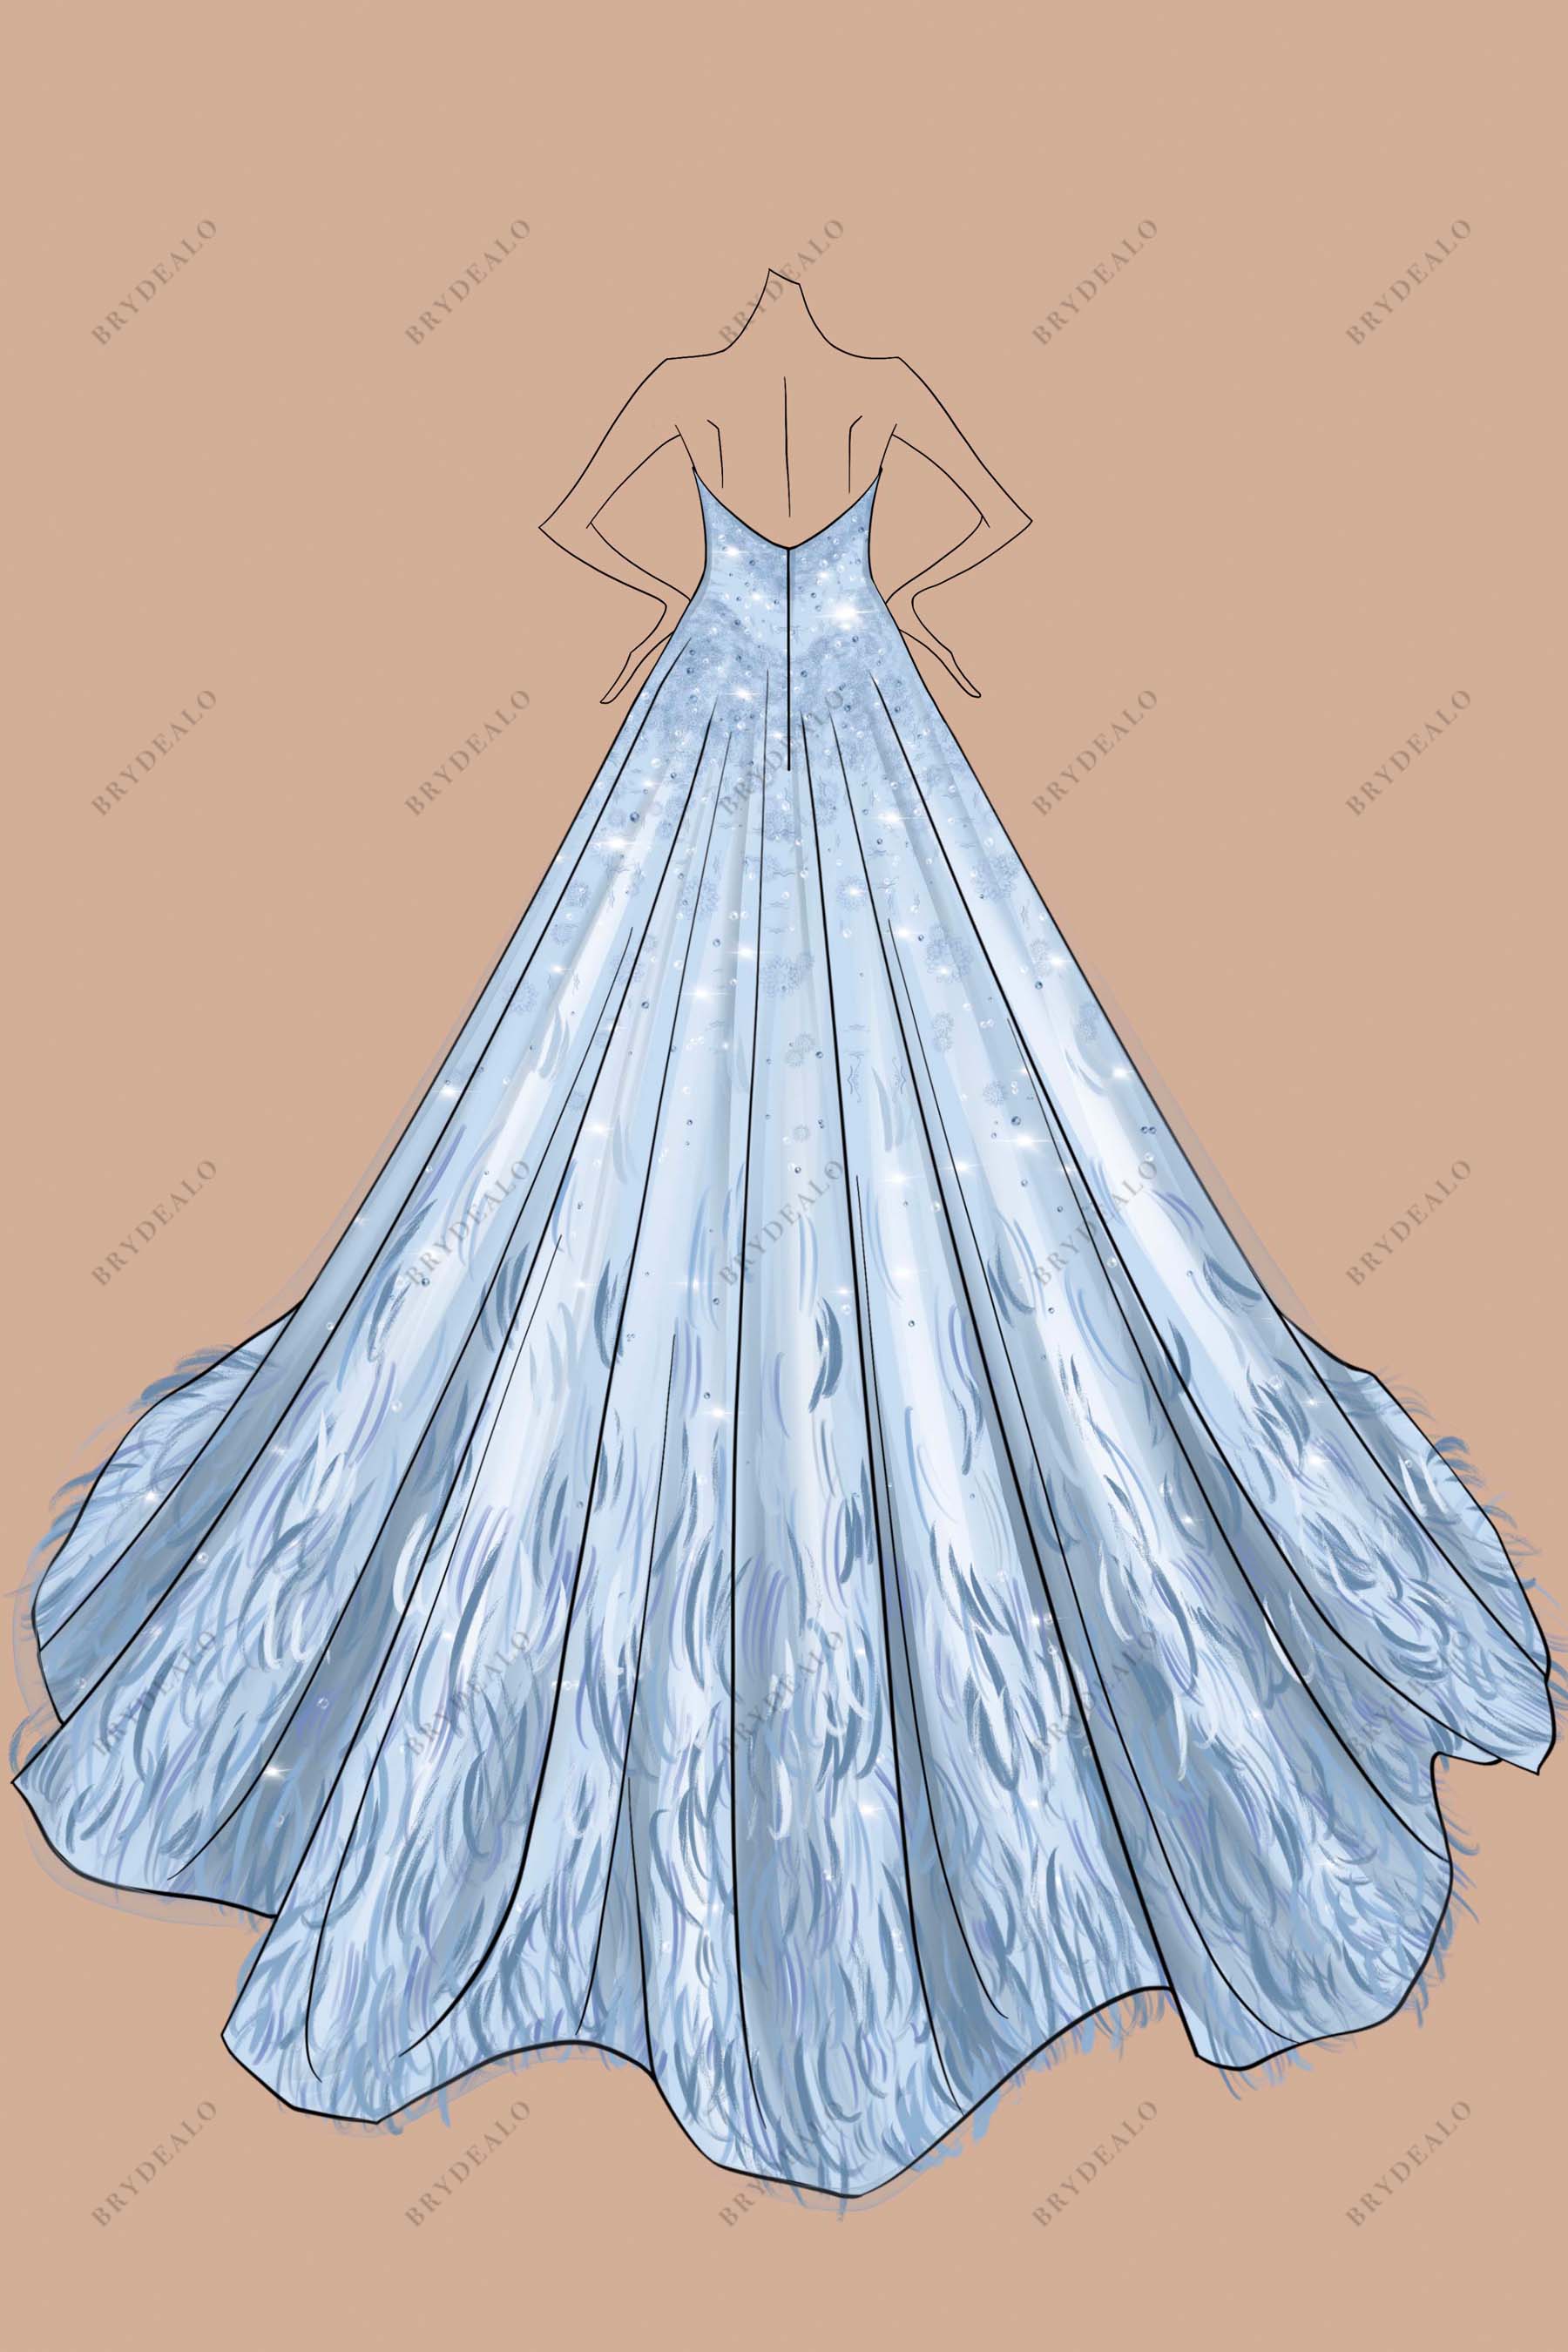 Three Fashion Models Wearing Elegant Wedding Gowns. Elements Are Grouped  And Layered For Easy Editing. Royalty vrije SVG, Cliparts, Vectoren, en  Stock Illustratie. Image 11801134